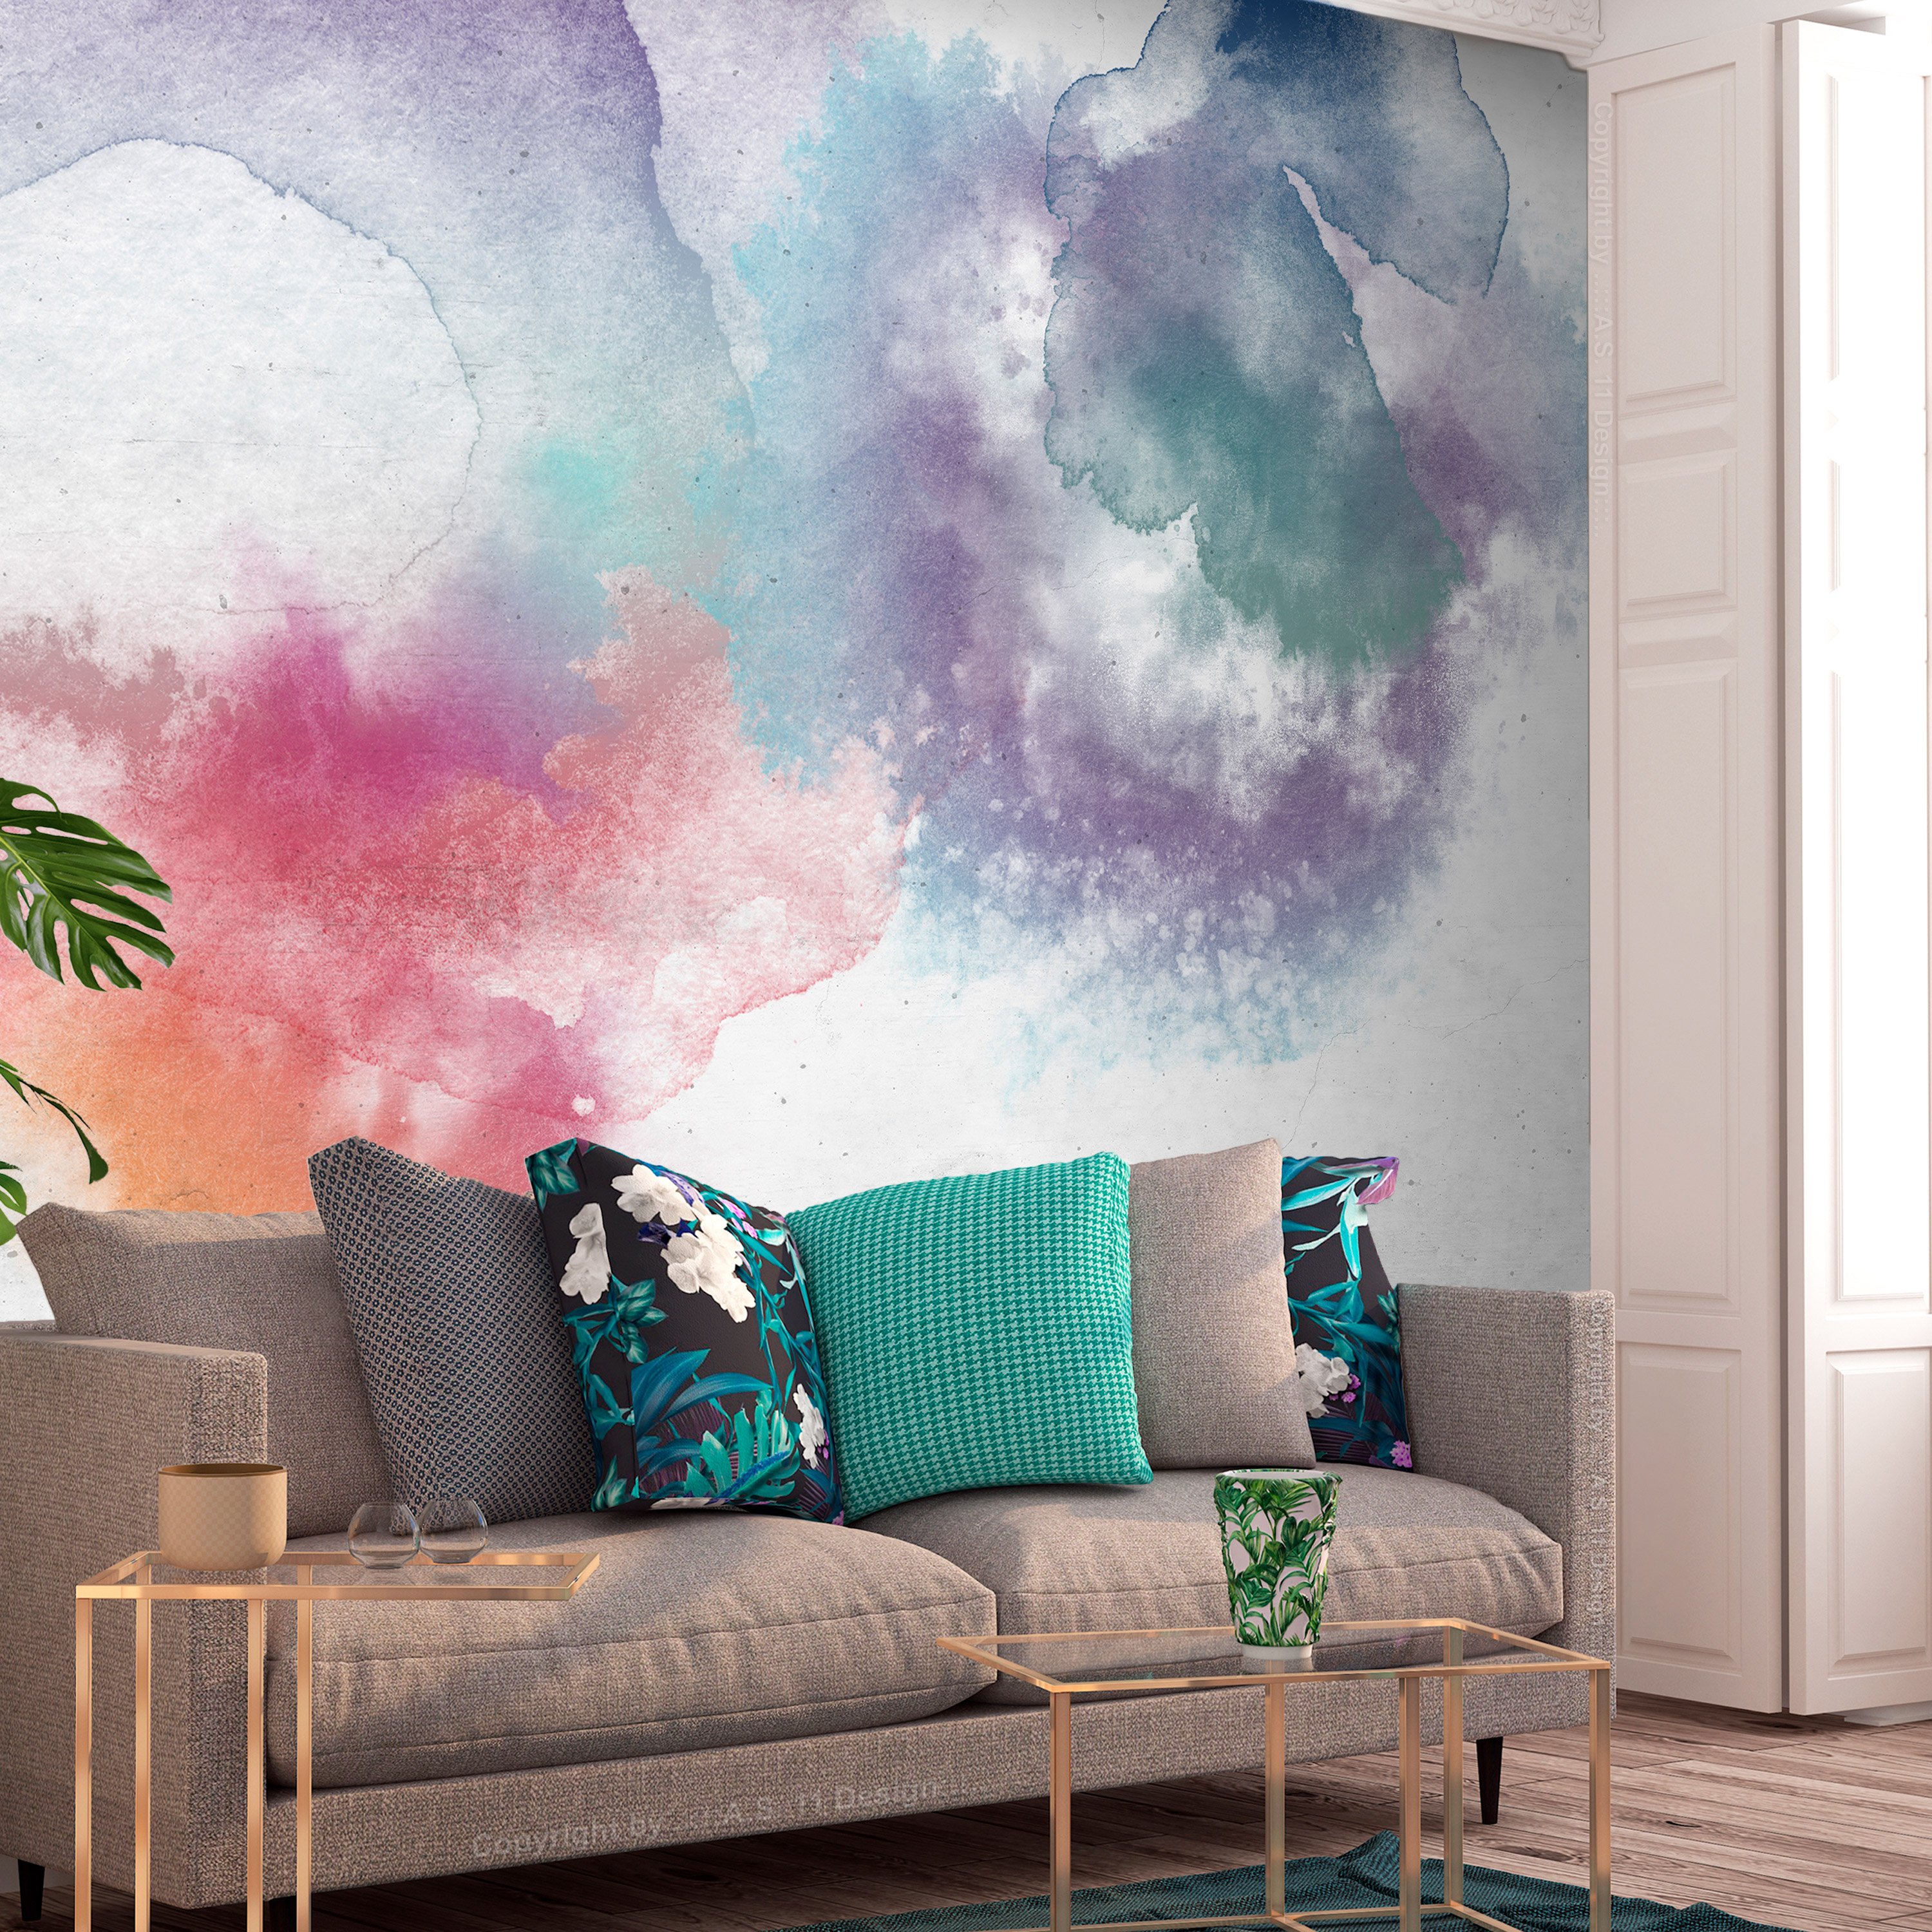 Self-adhesive Wallpaper - Painted Mirages - First Variant - 245x175